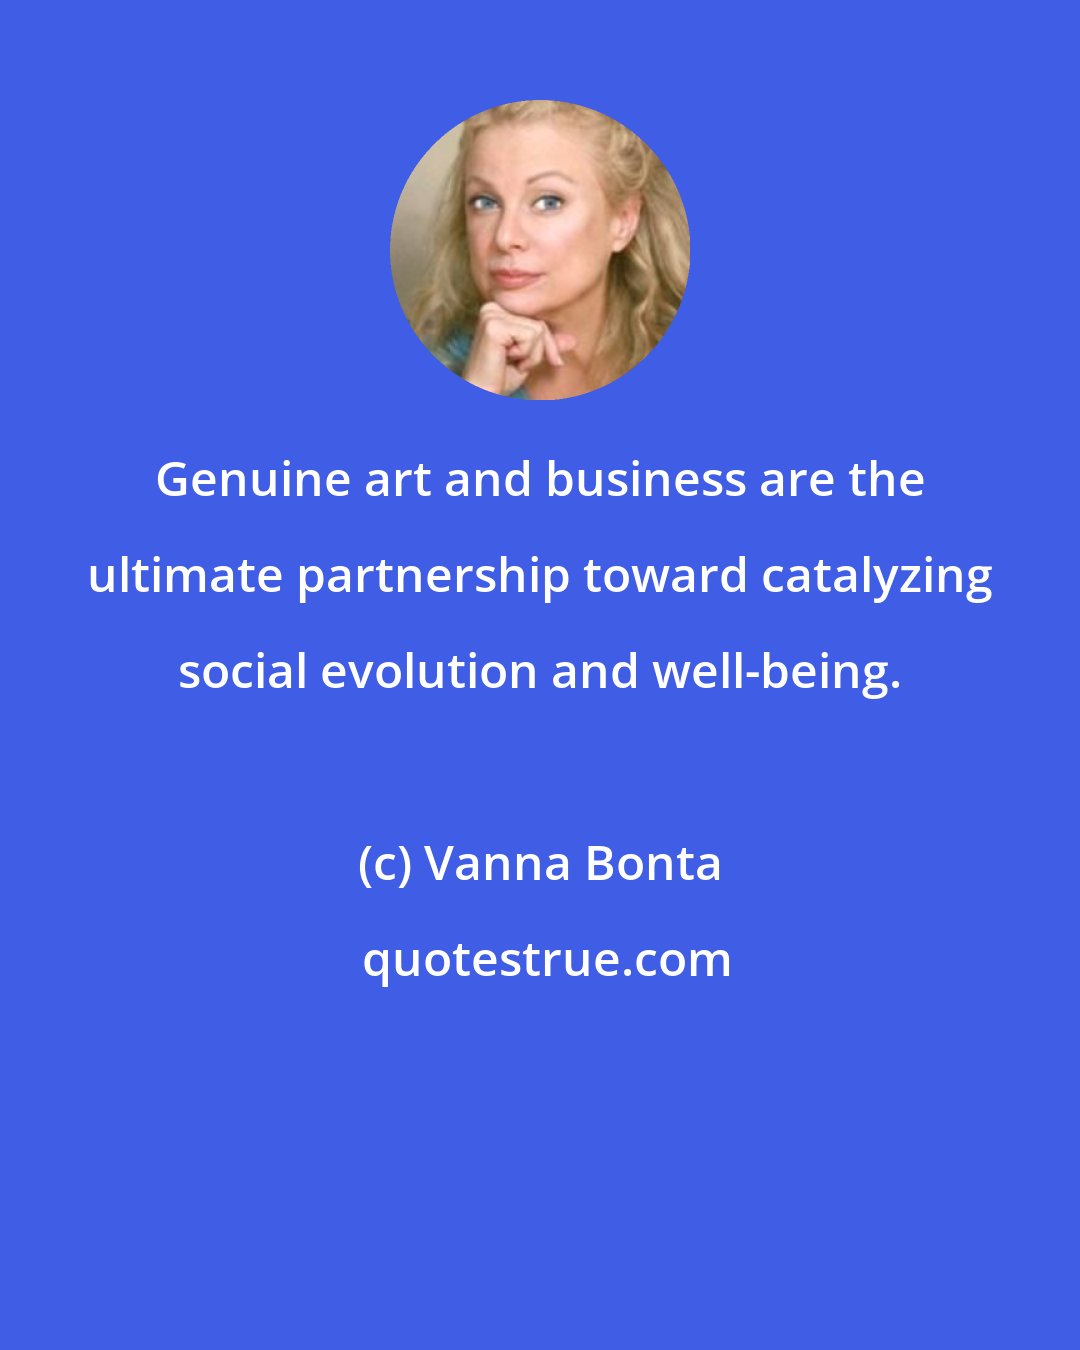 Vanna Bonta: Genuine art and business are the ultimate partnership toward catalyzing social evolution and well-being.